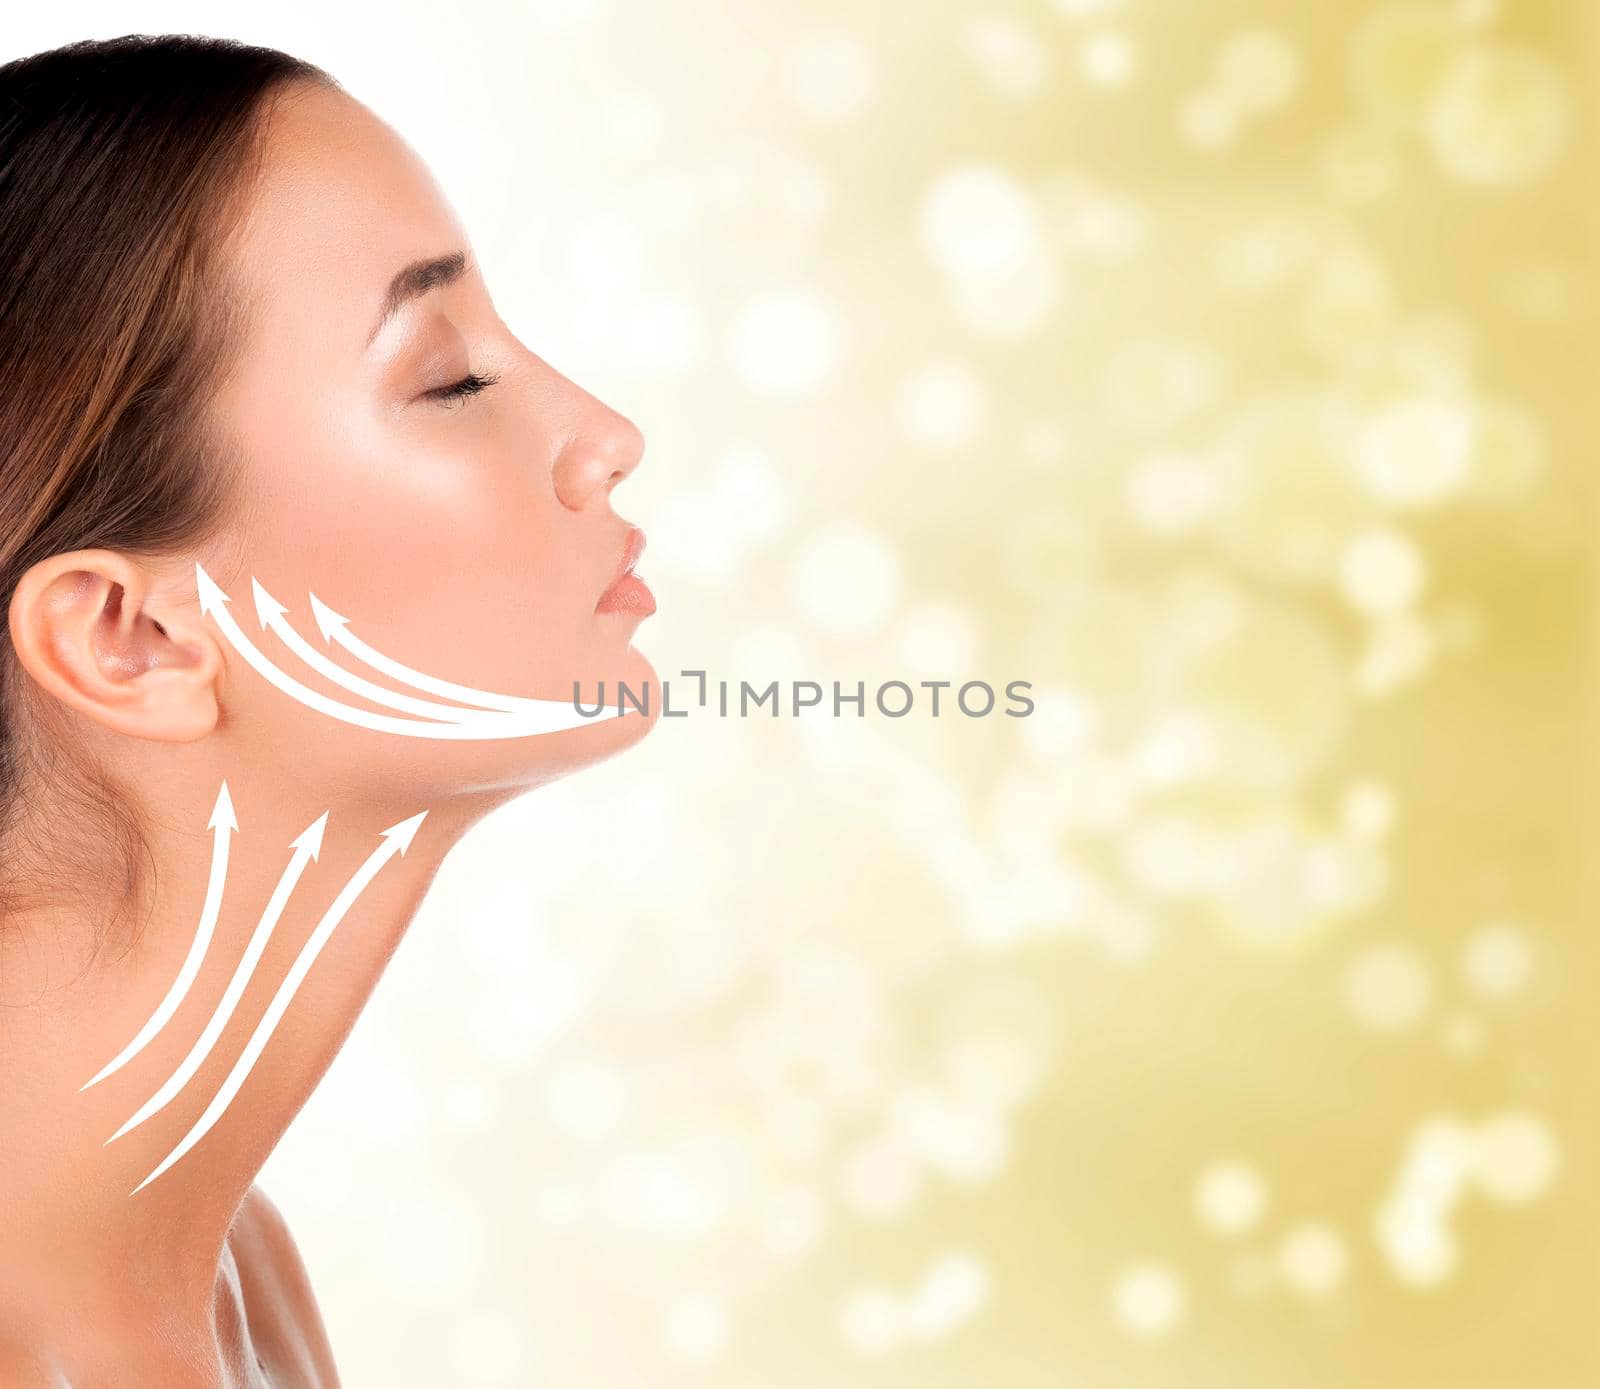 Portrait of woman with perfect skin and makeup, antiaging concept. golden blurred background.